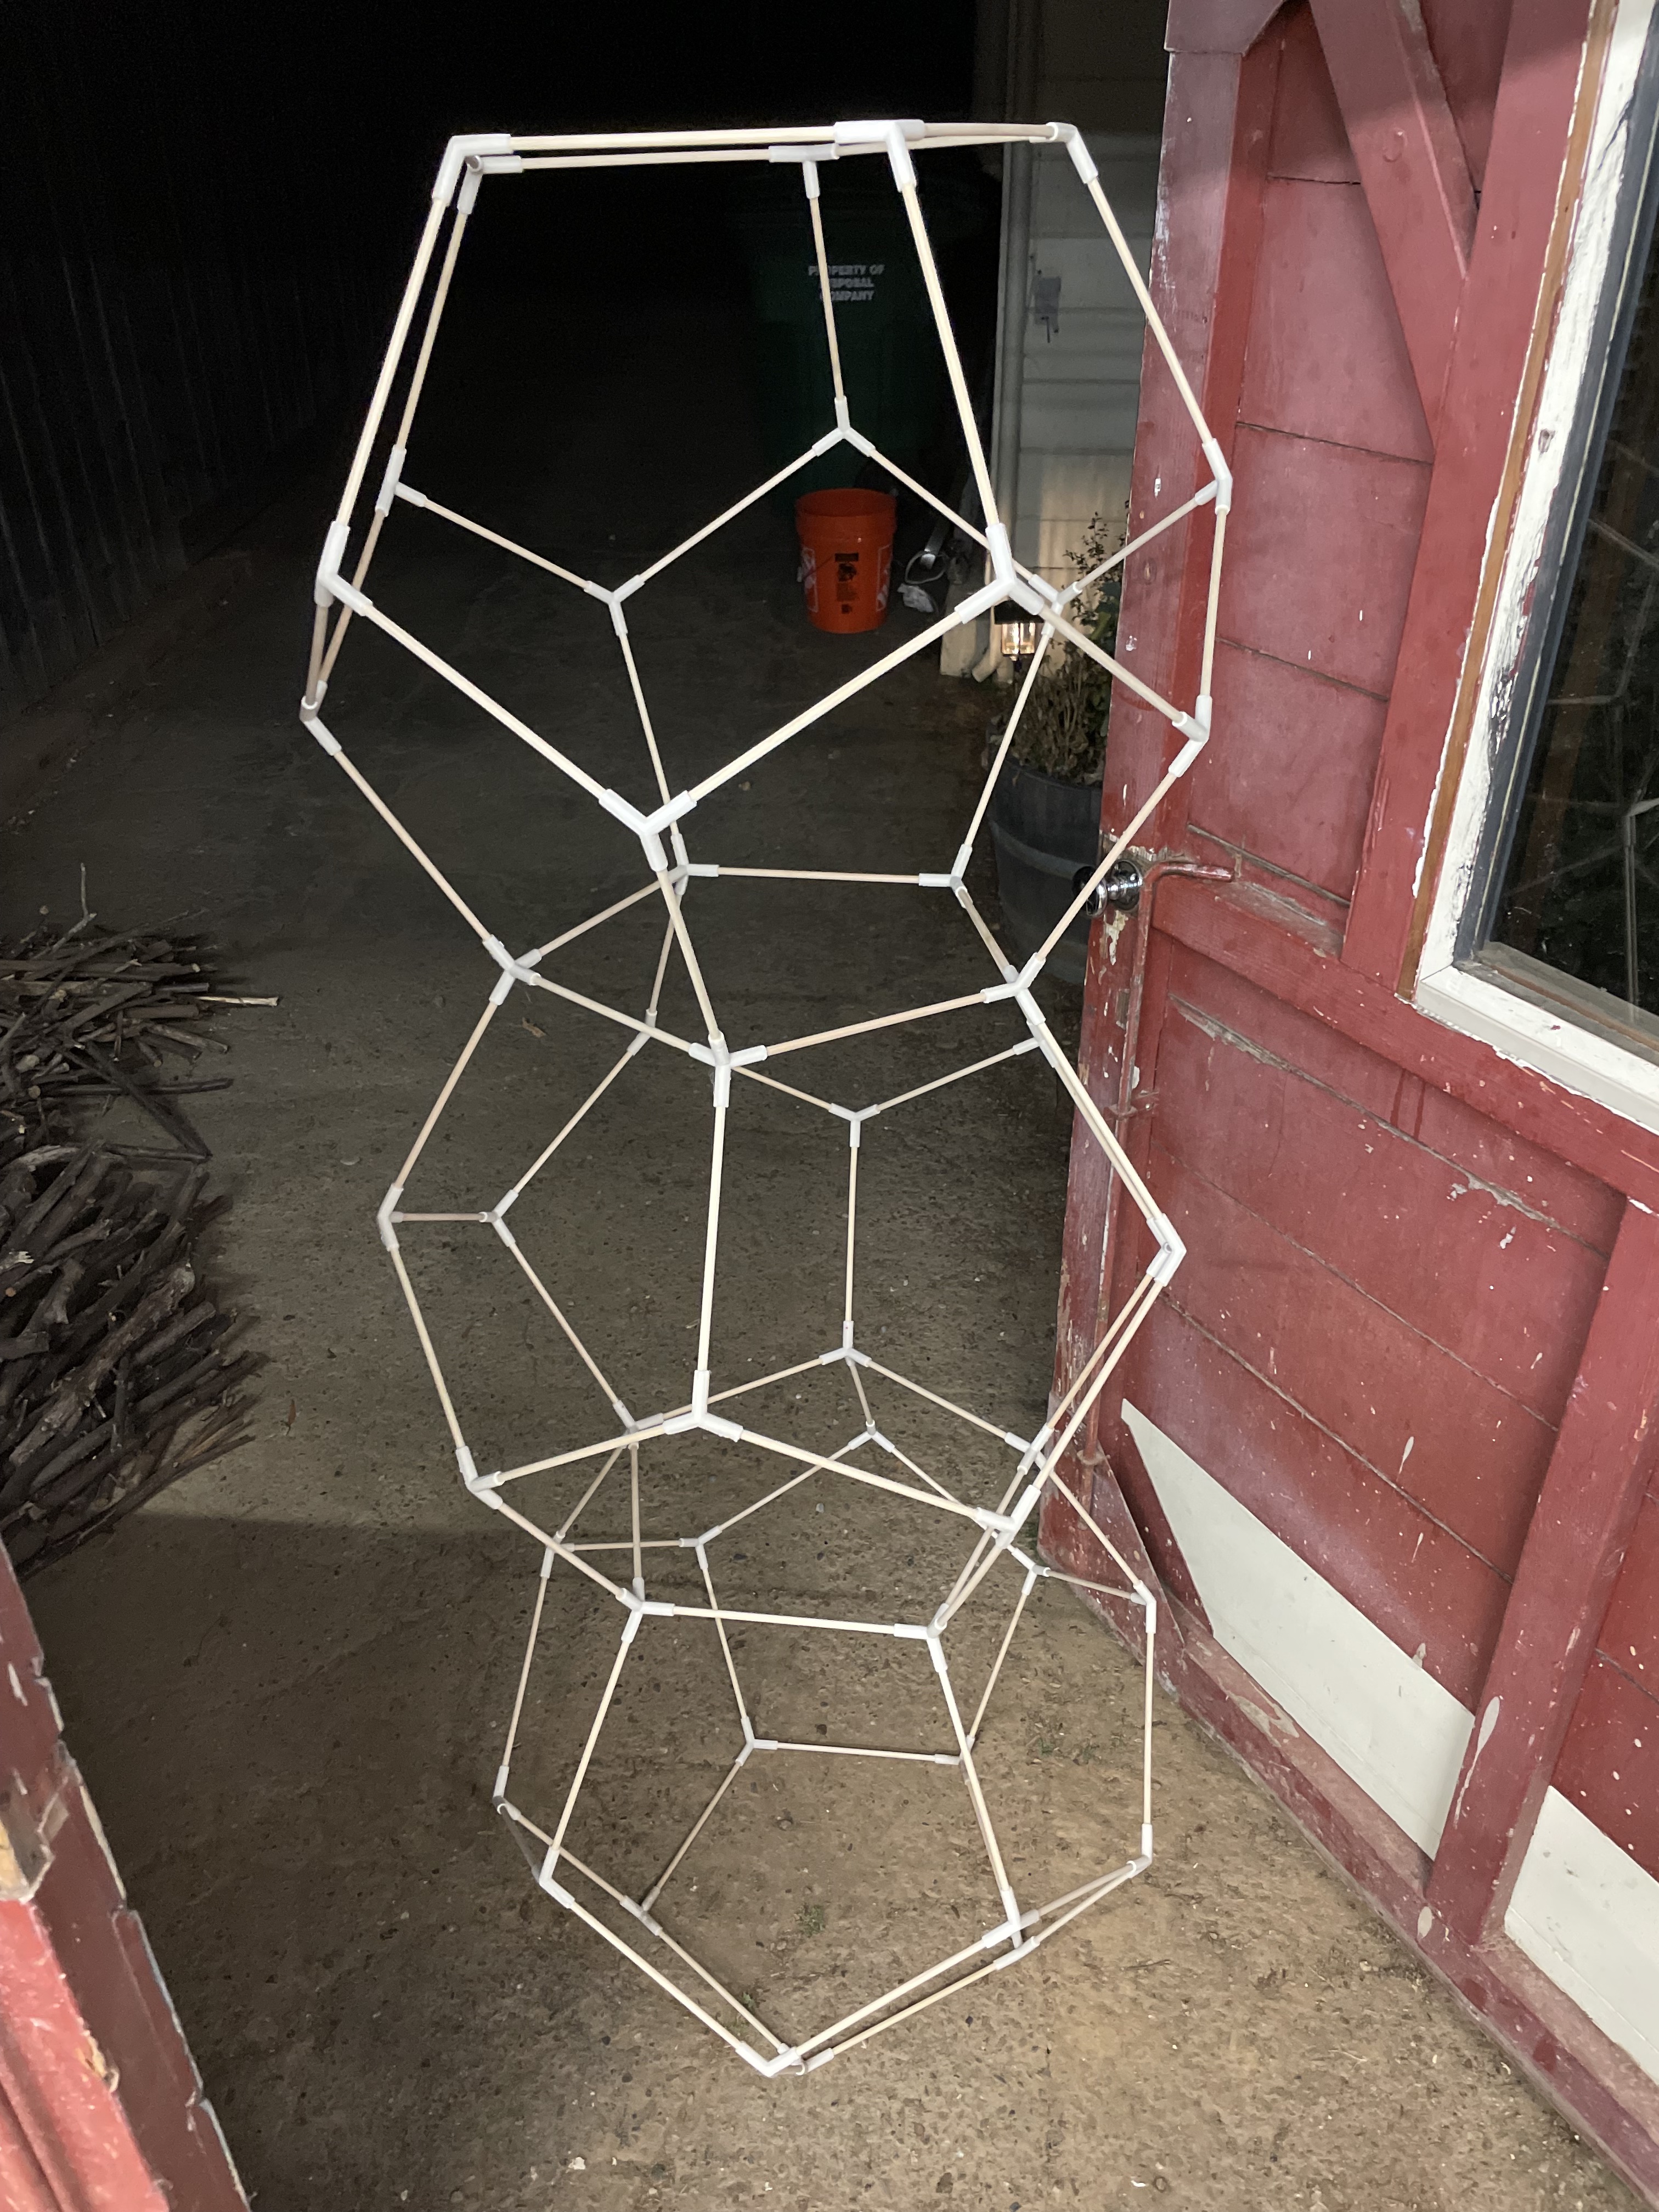 stacked dodecahedron 3d printed trellis